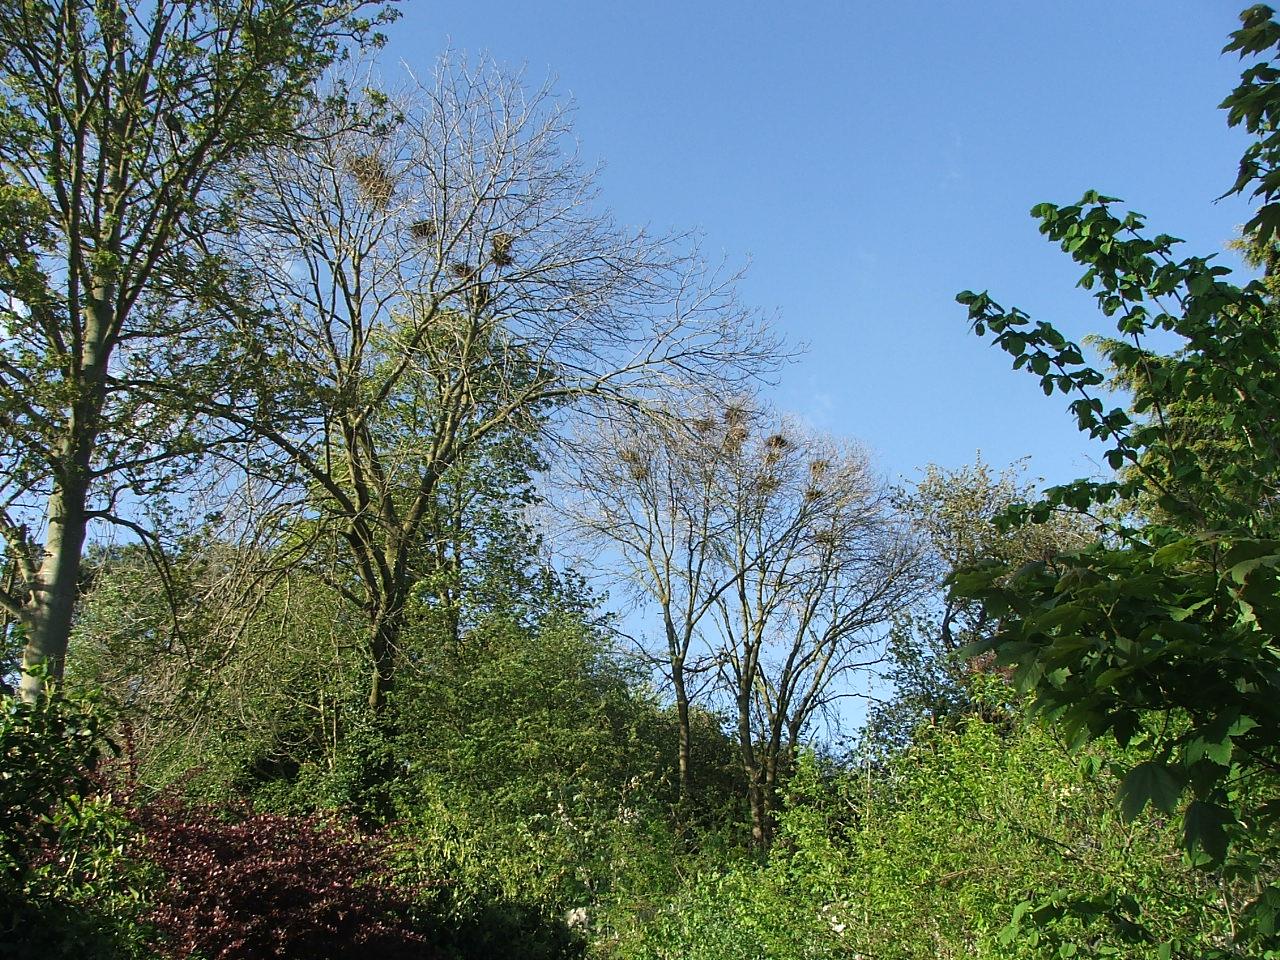 There is a thriving rookery in East Keal